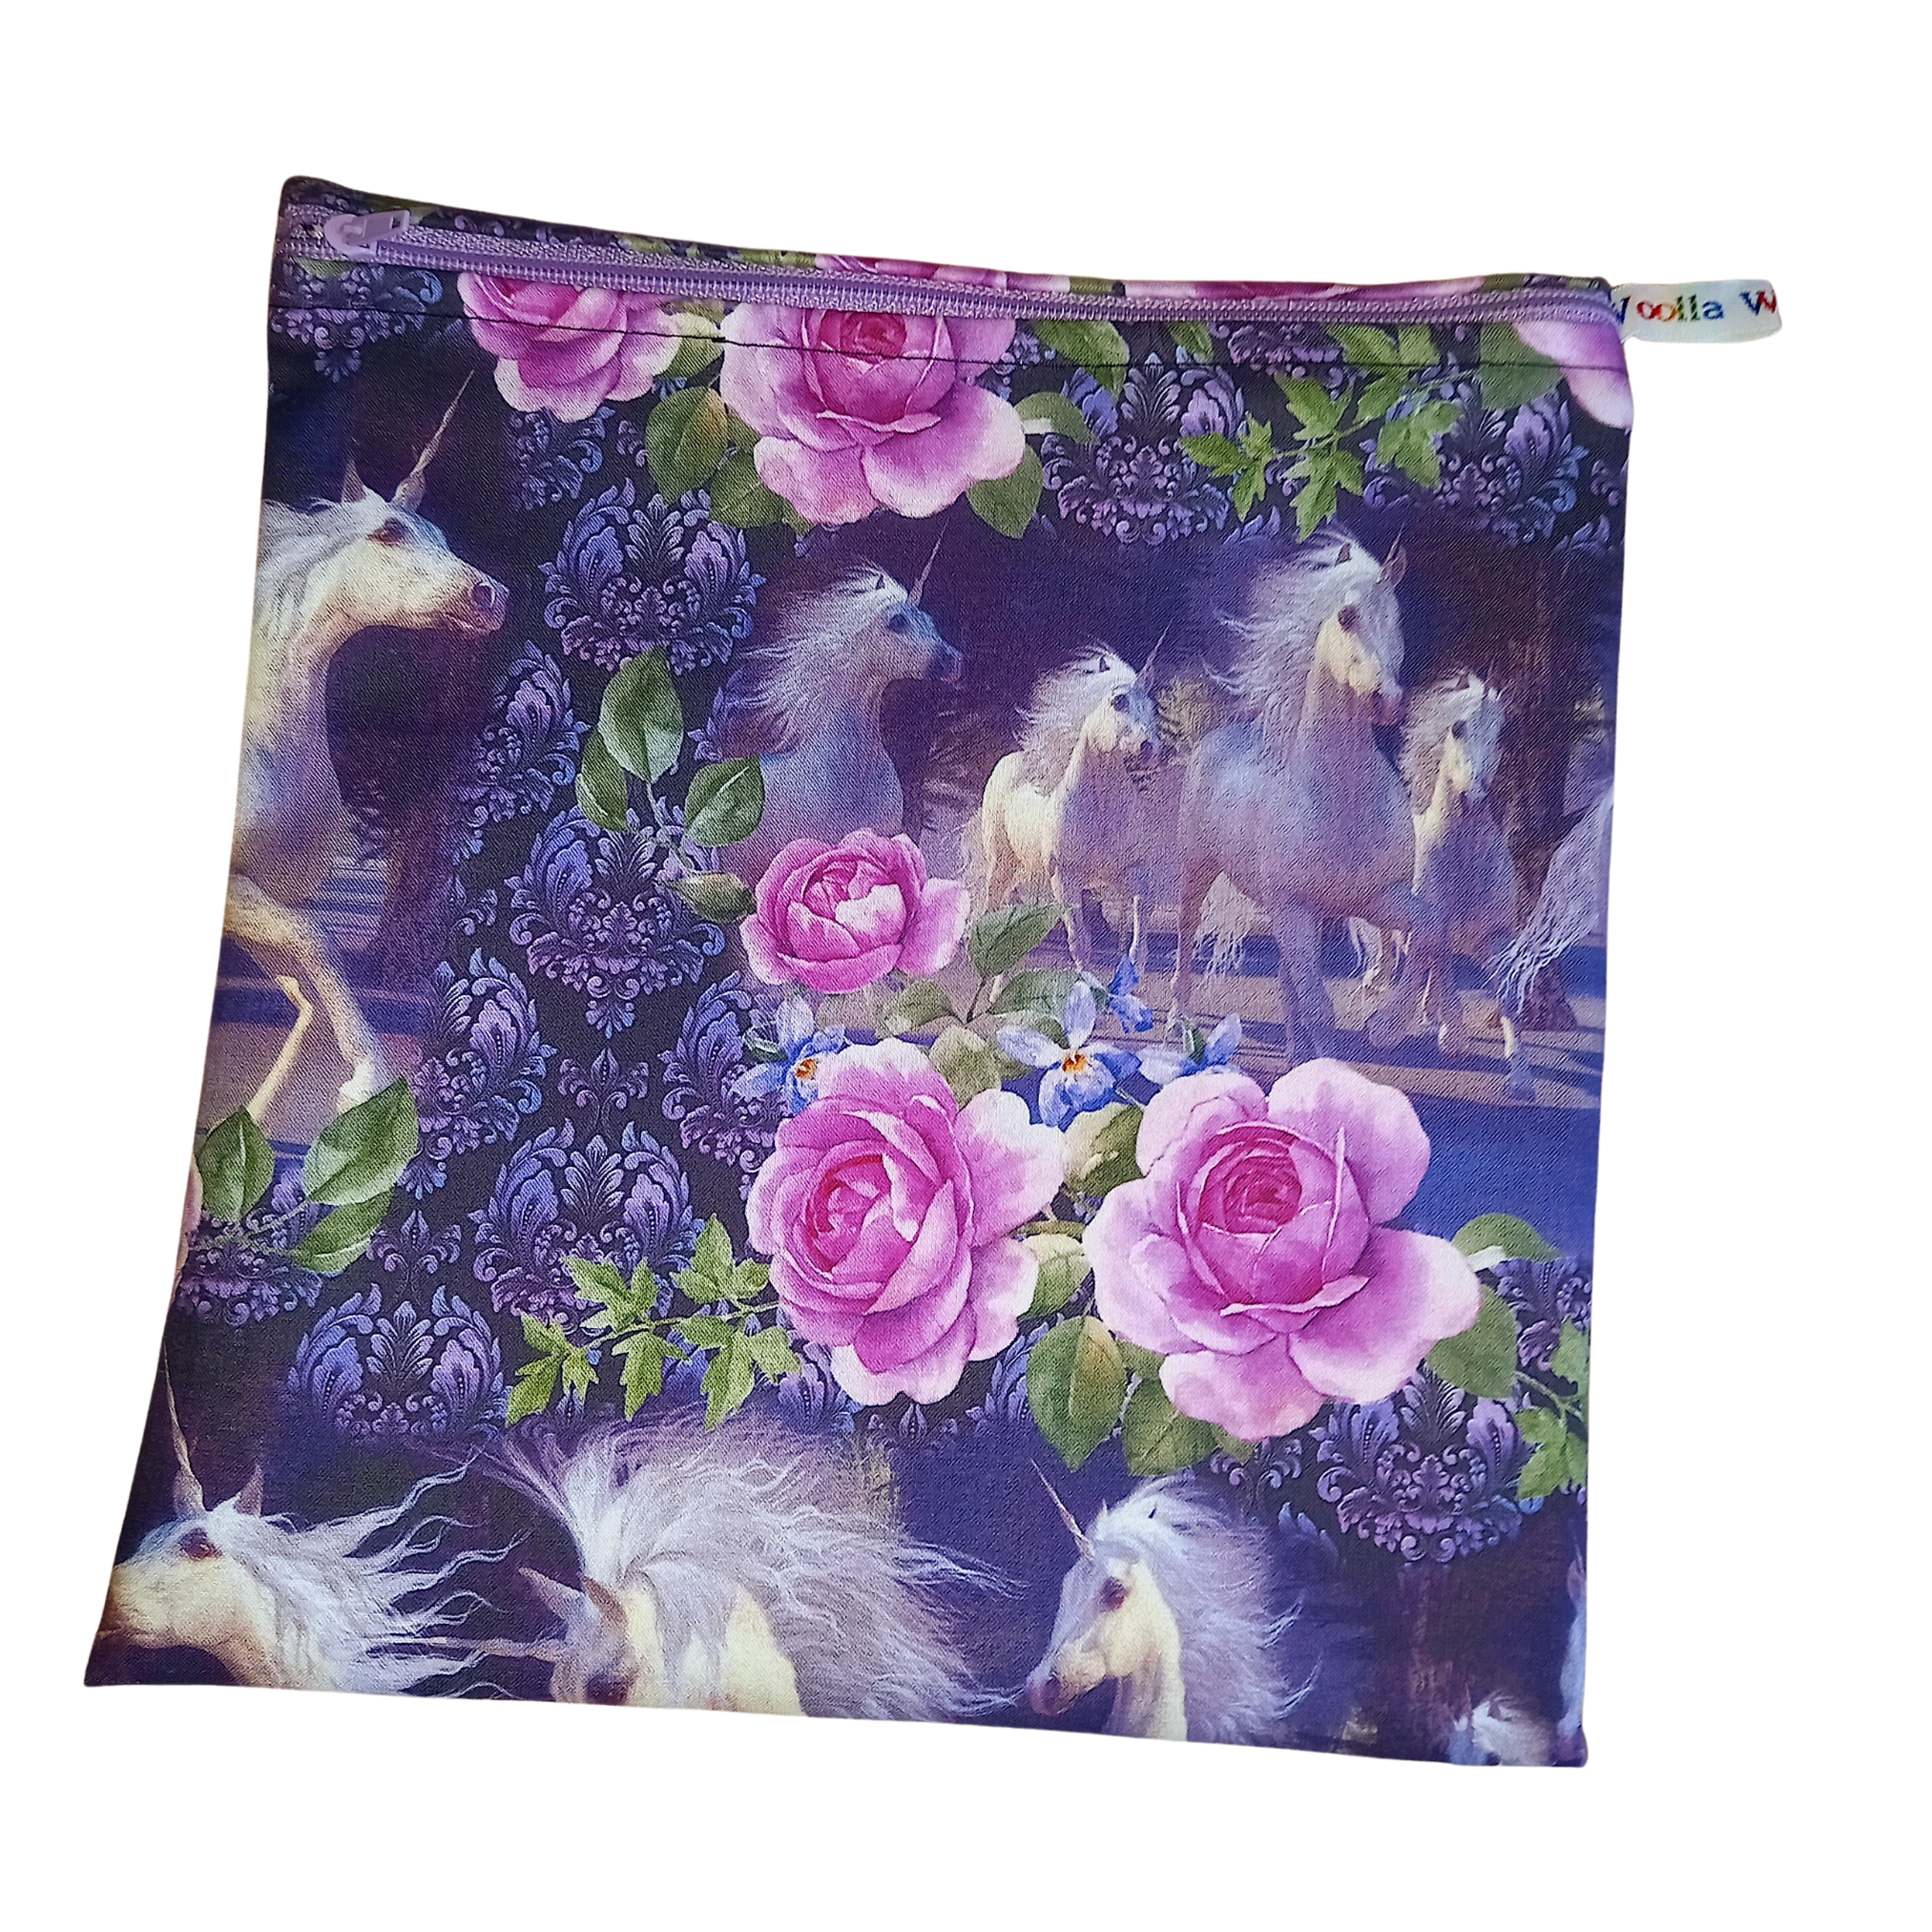 Floral Fantasy Unicorn - Large Poppins Pouch - Waterproof, Washable, Food Safe, Vegan, Lined Zip Bag